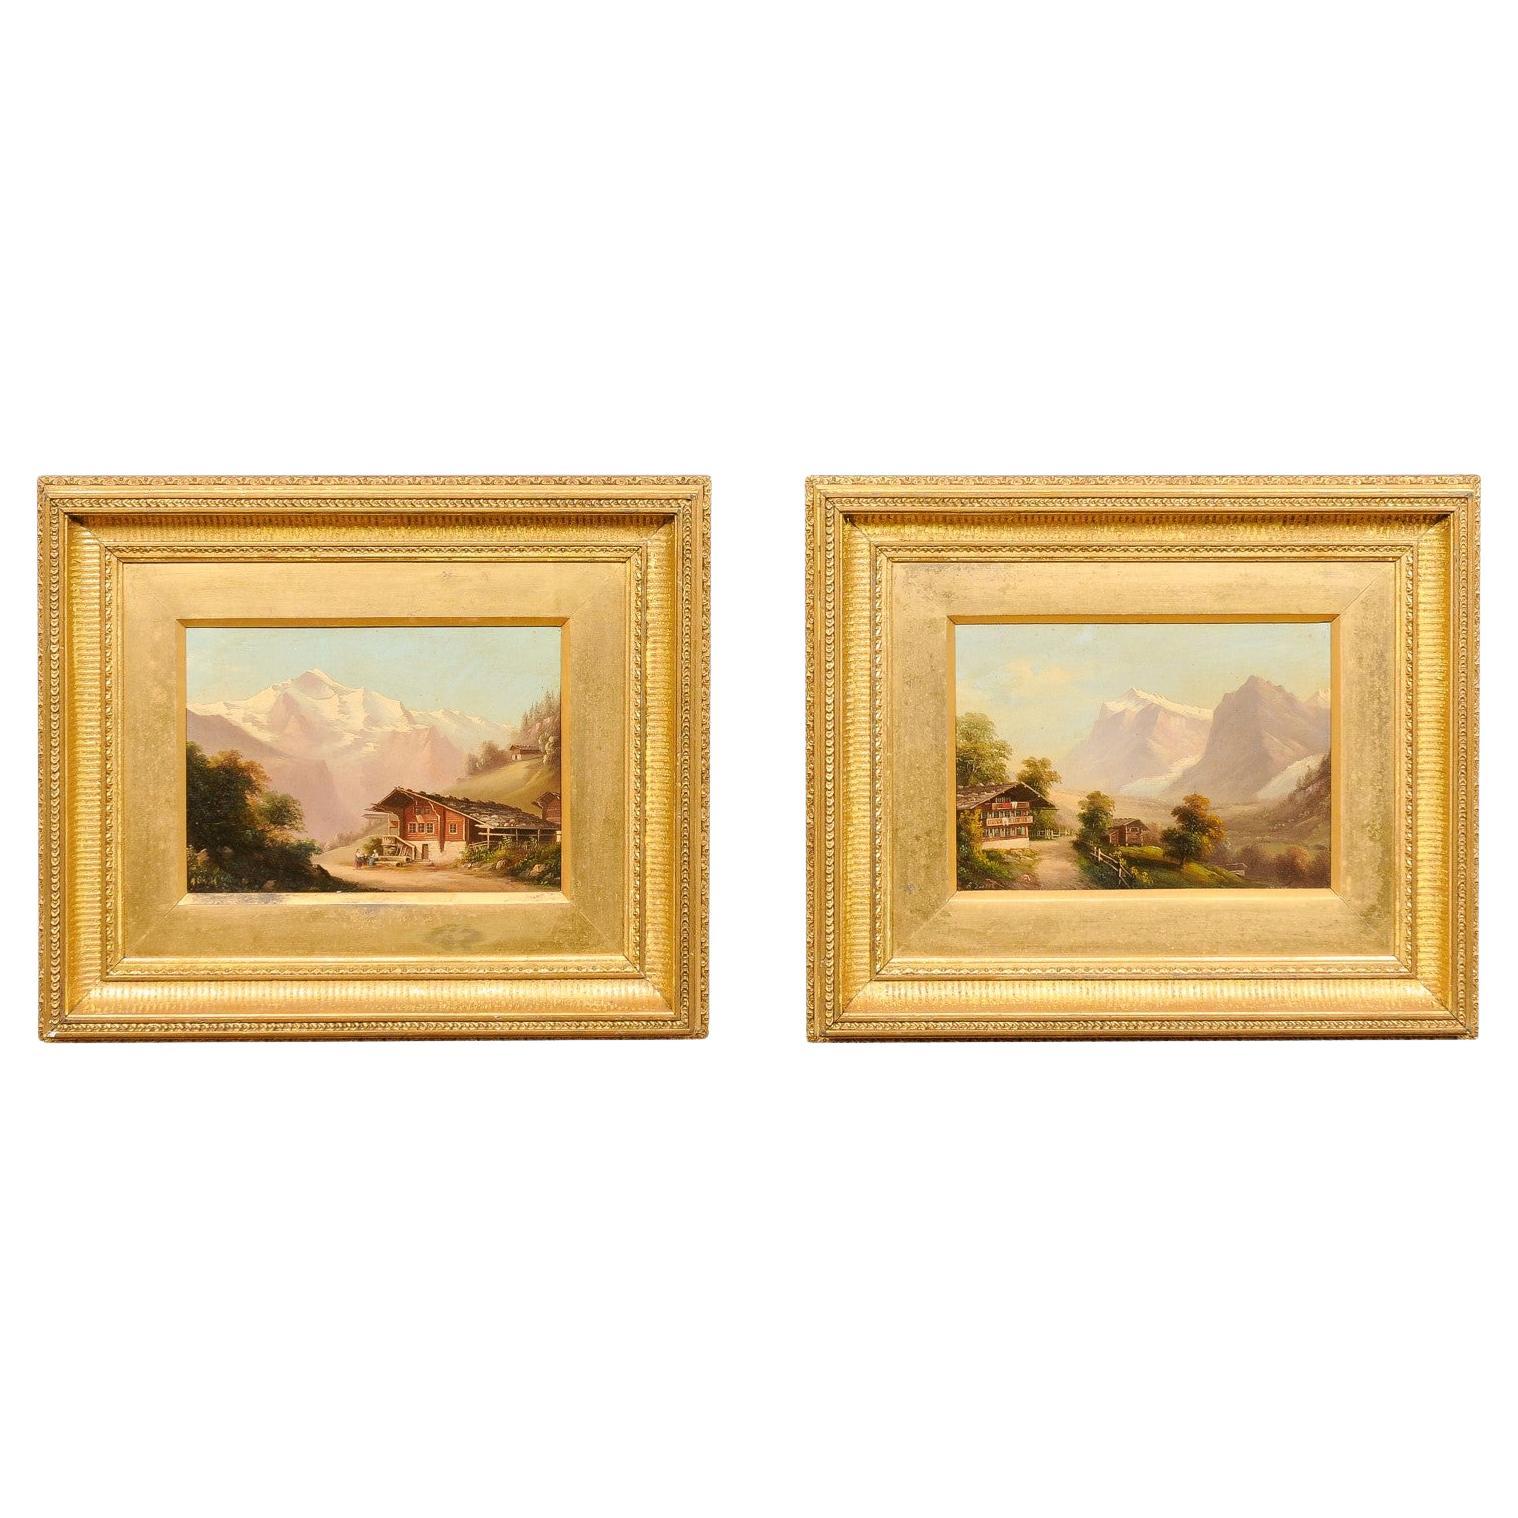 Pair of Gilt Framed Oil on Board Landscape Paintings of Mountain Scenes, 19th C For Sale